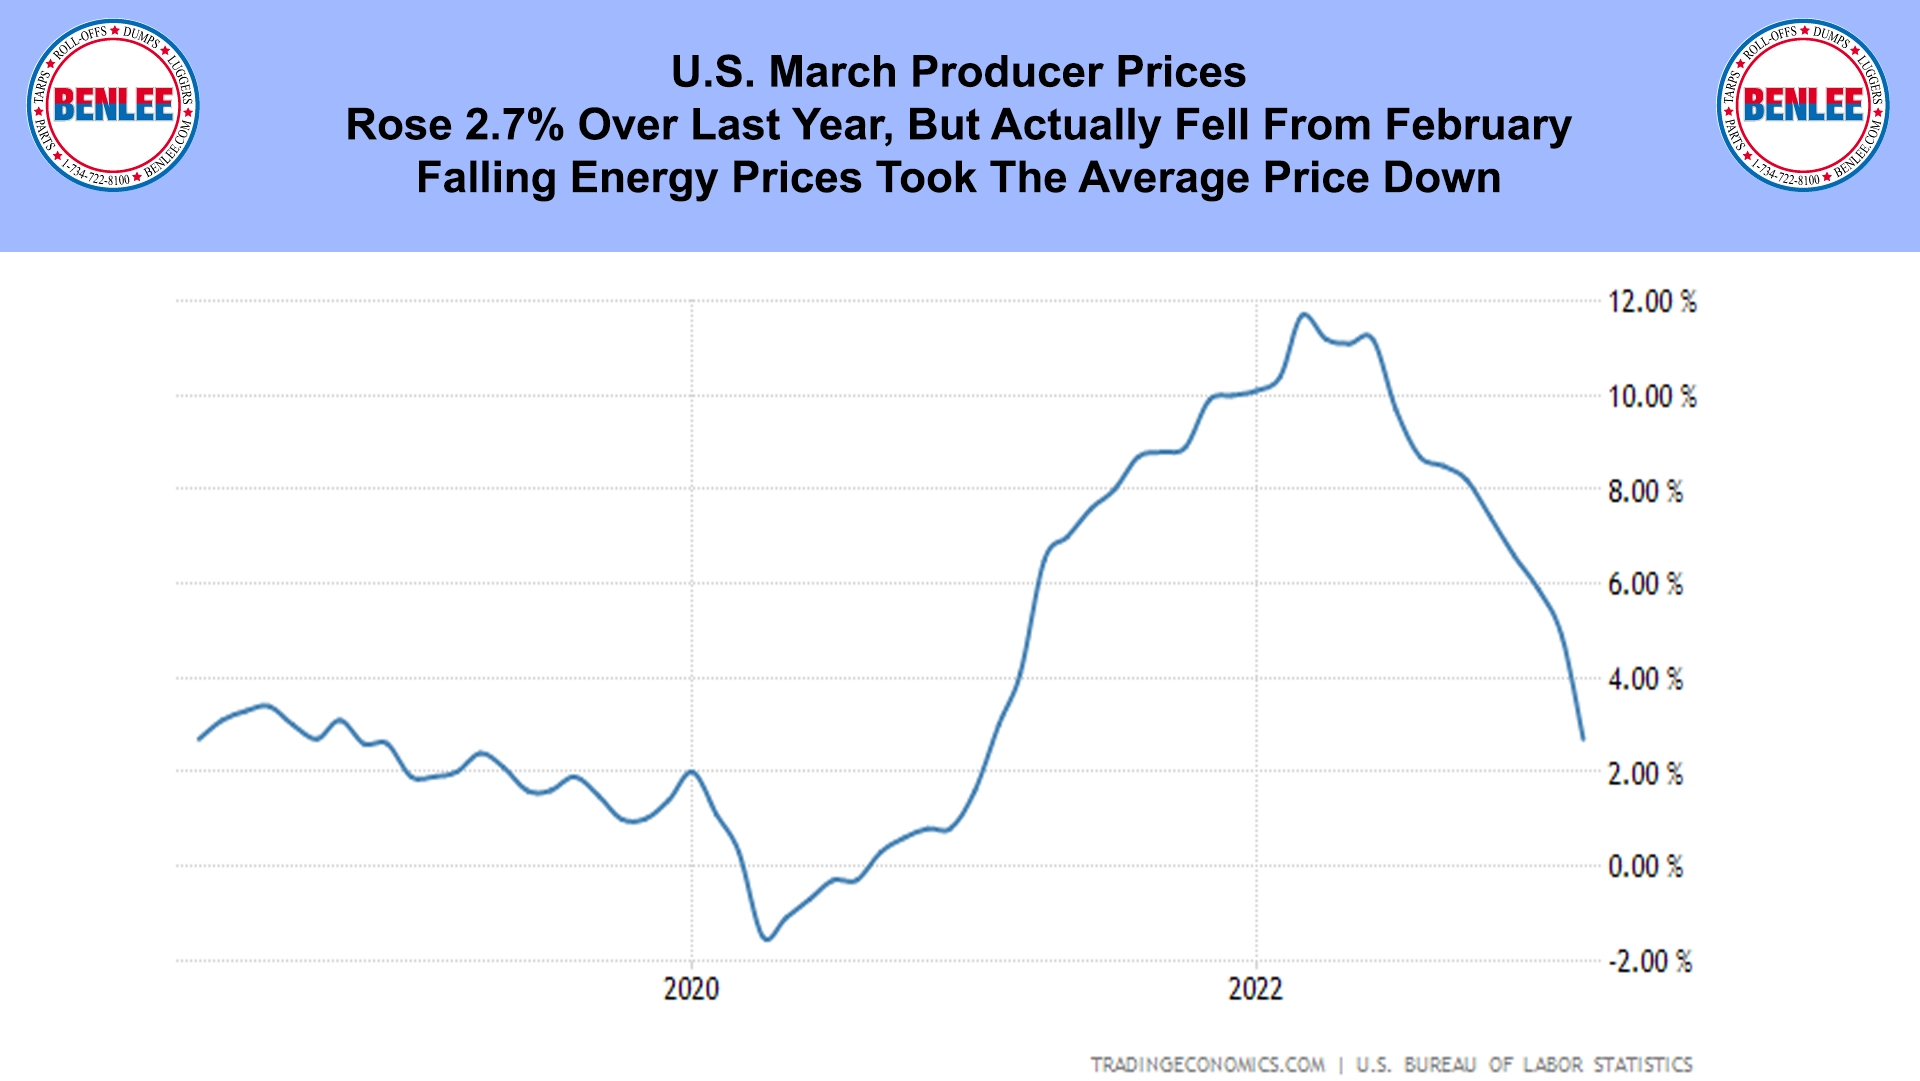 U.S. March Producer Prices